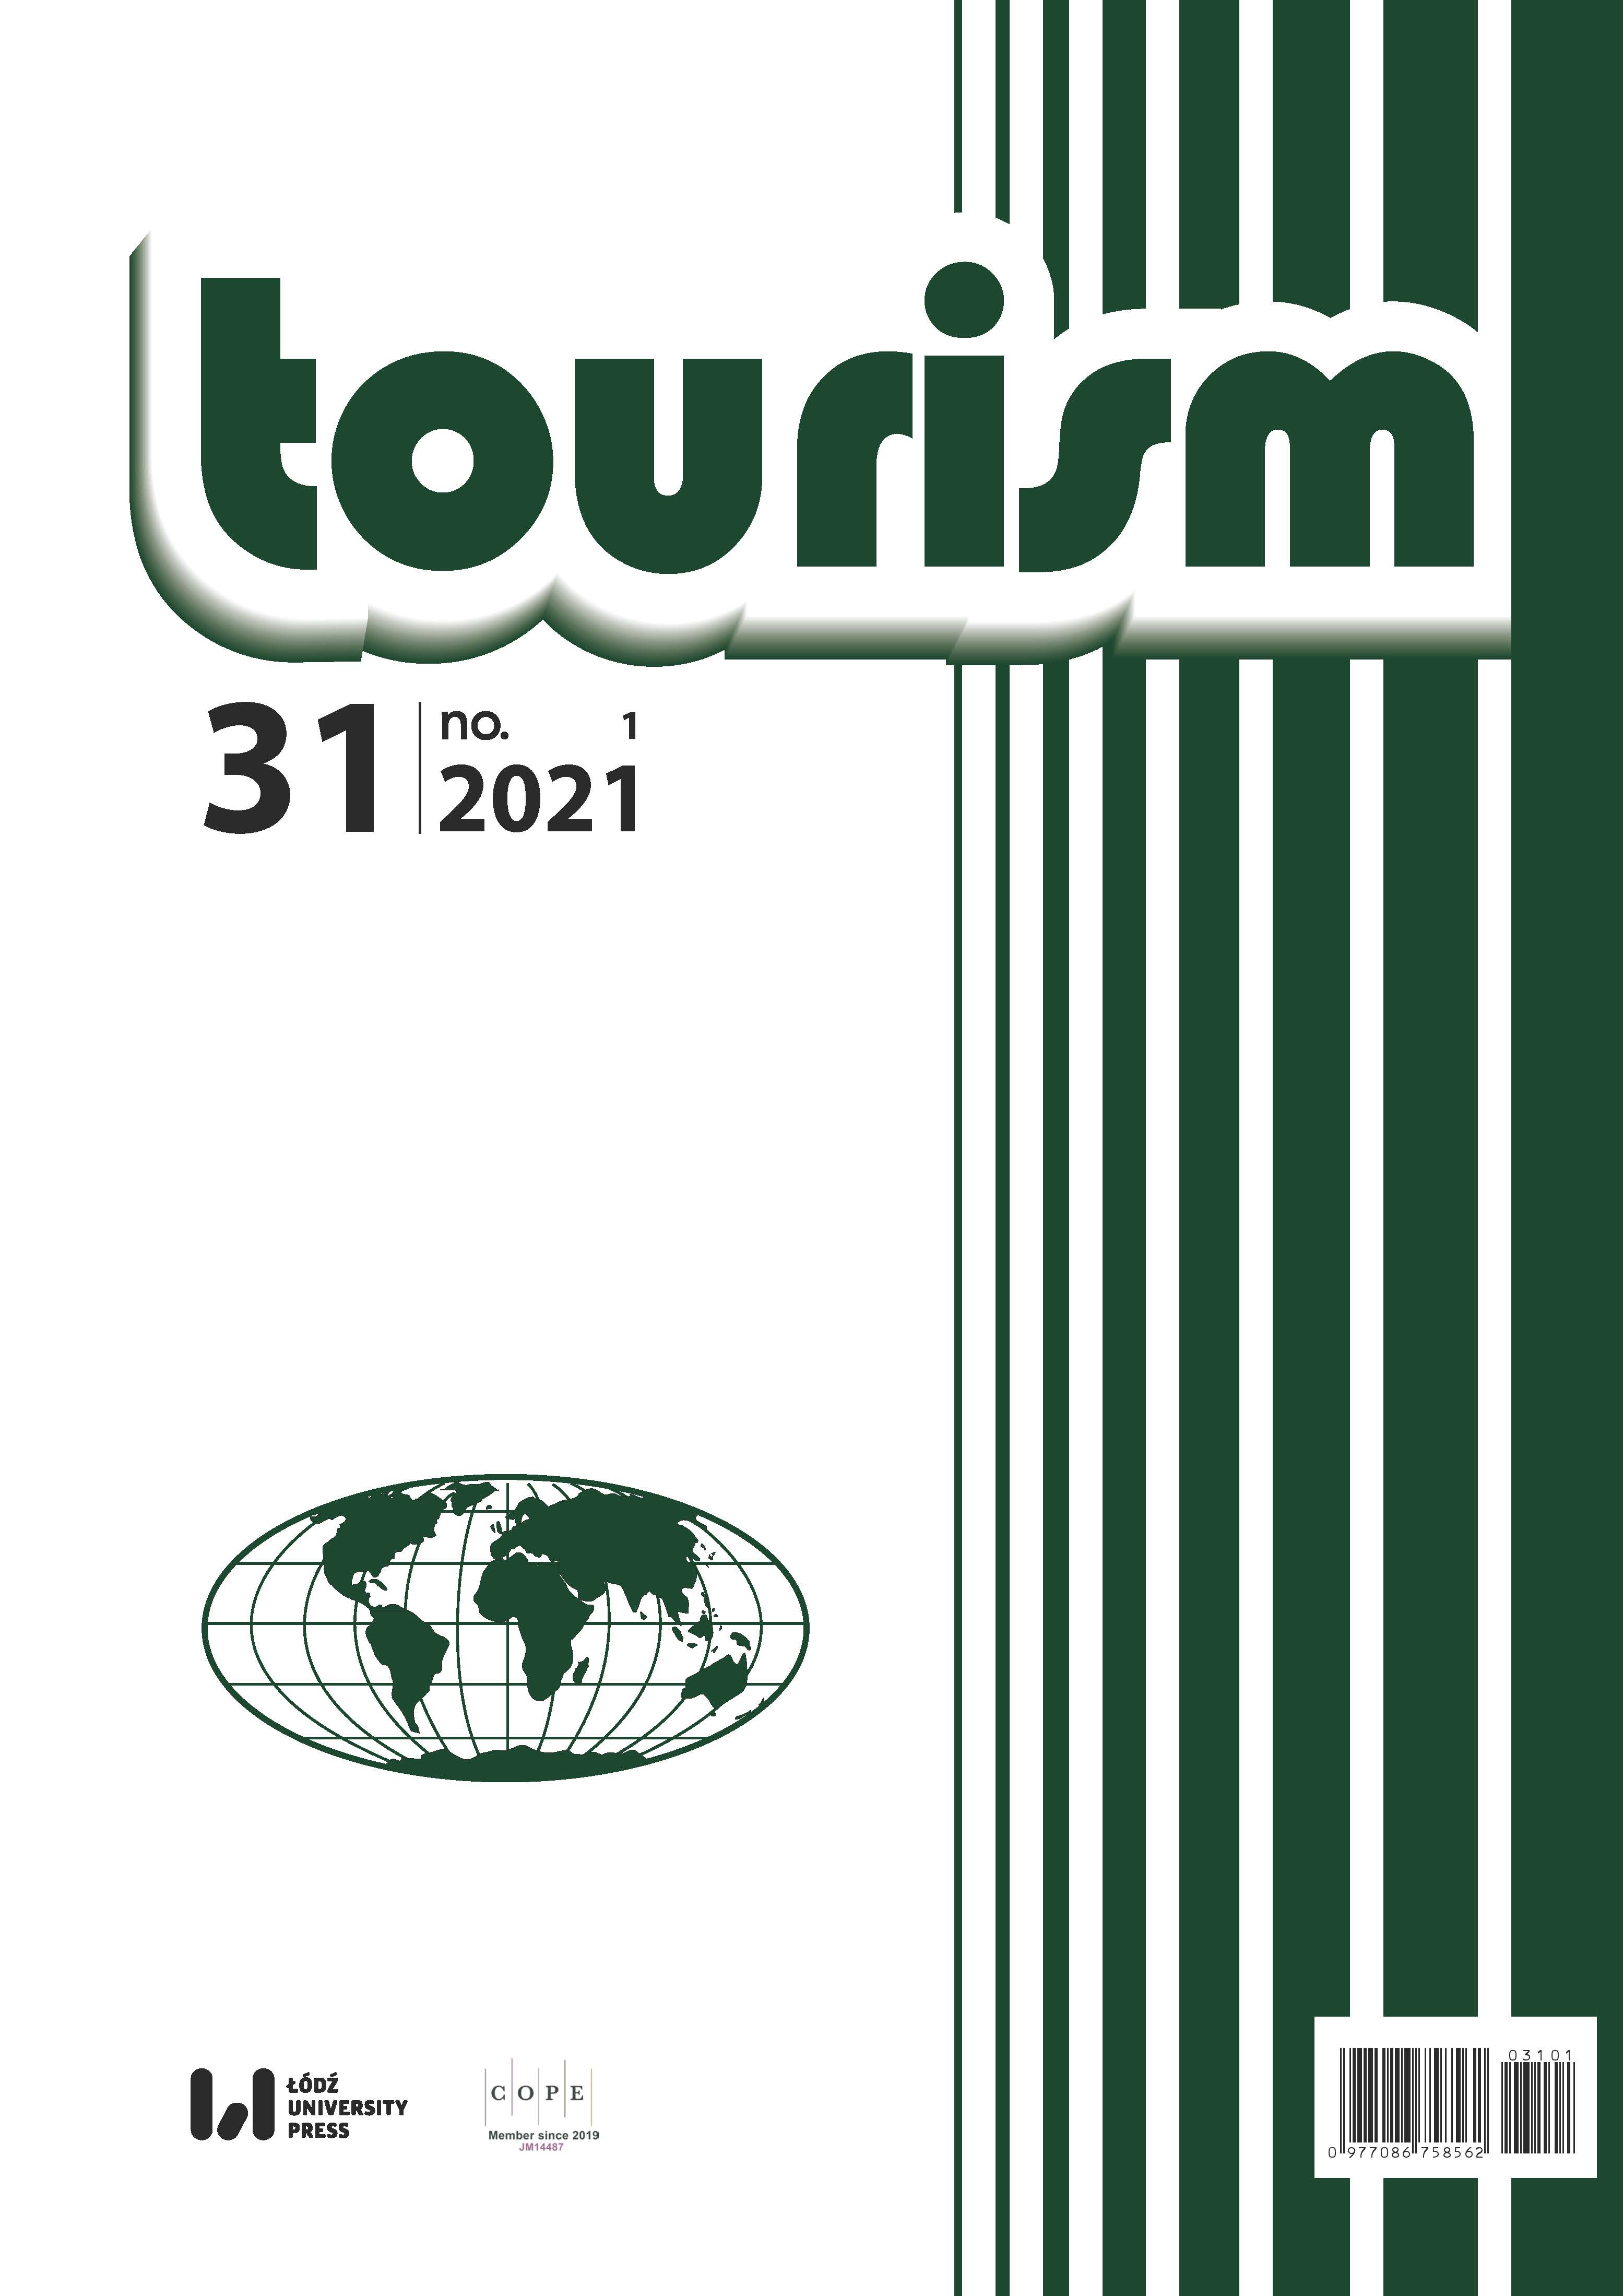 A cluster approach to the formation of tourism destinations in Western Ukrainian cross-border regions